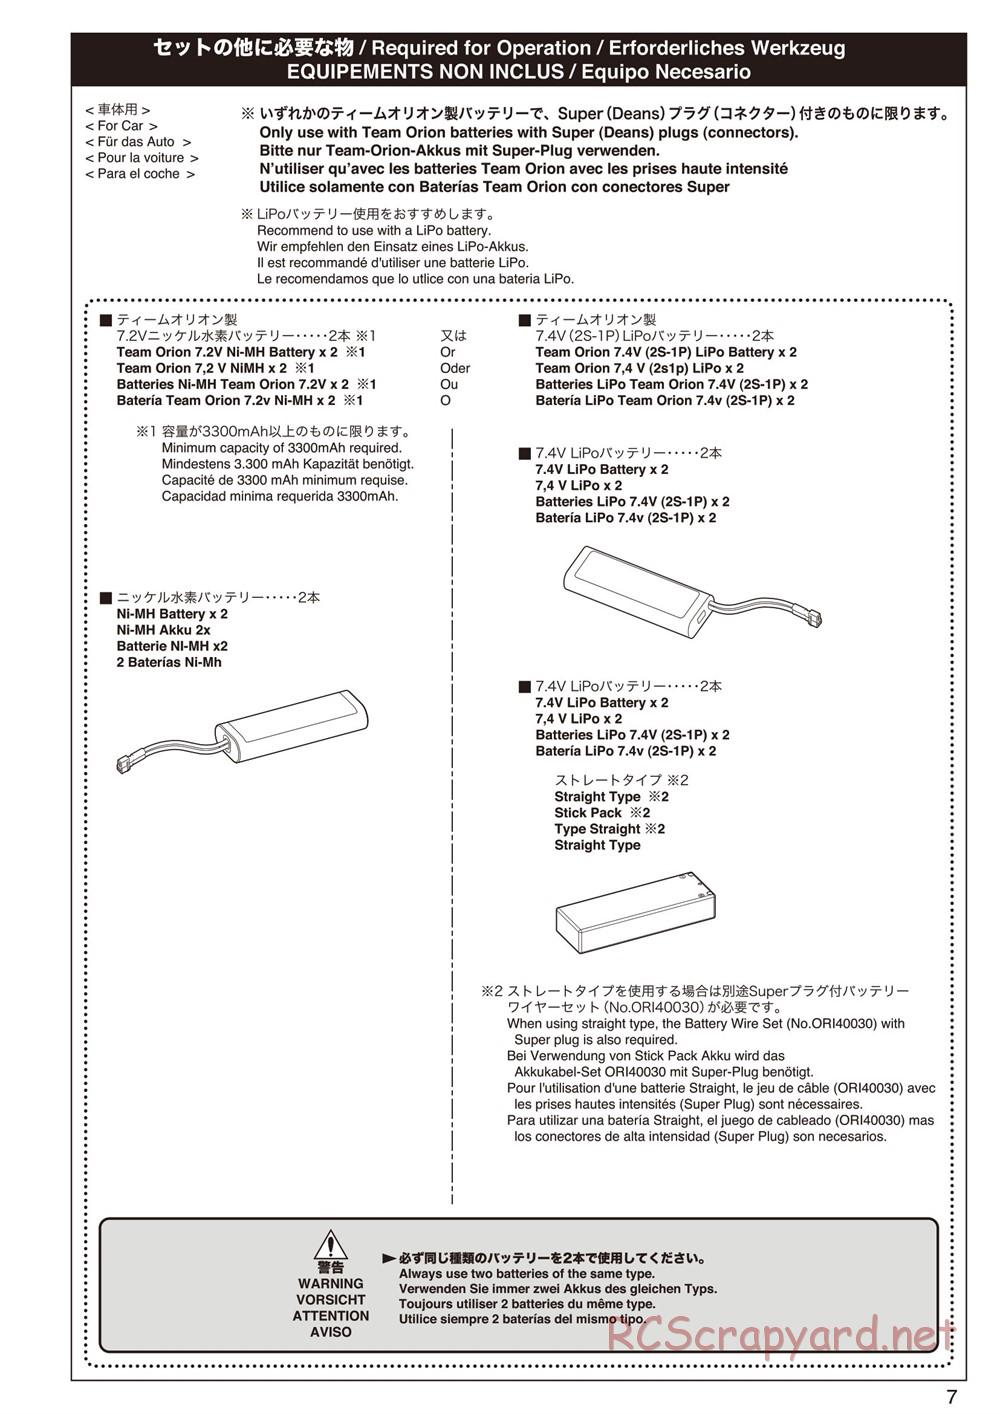 Kyosho - FO-XX VE - Manual - Page 7